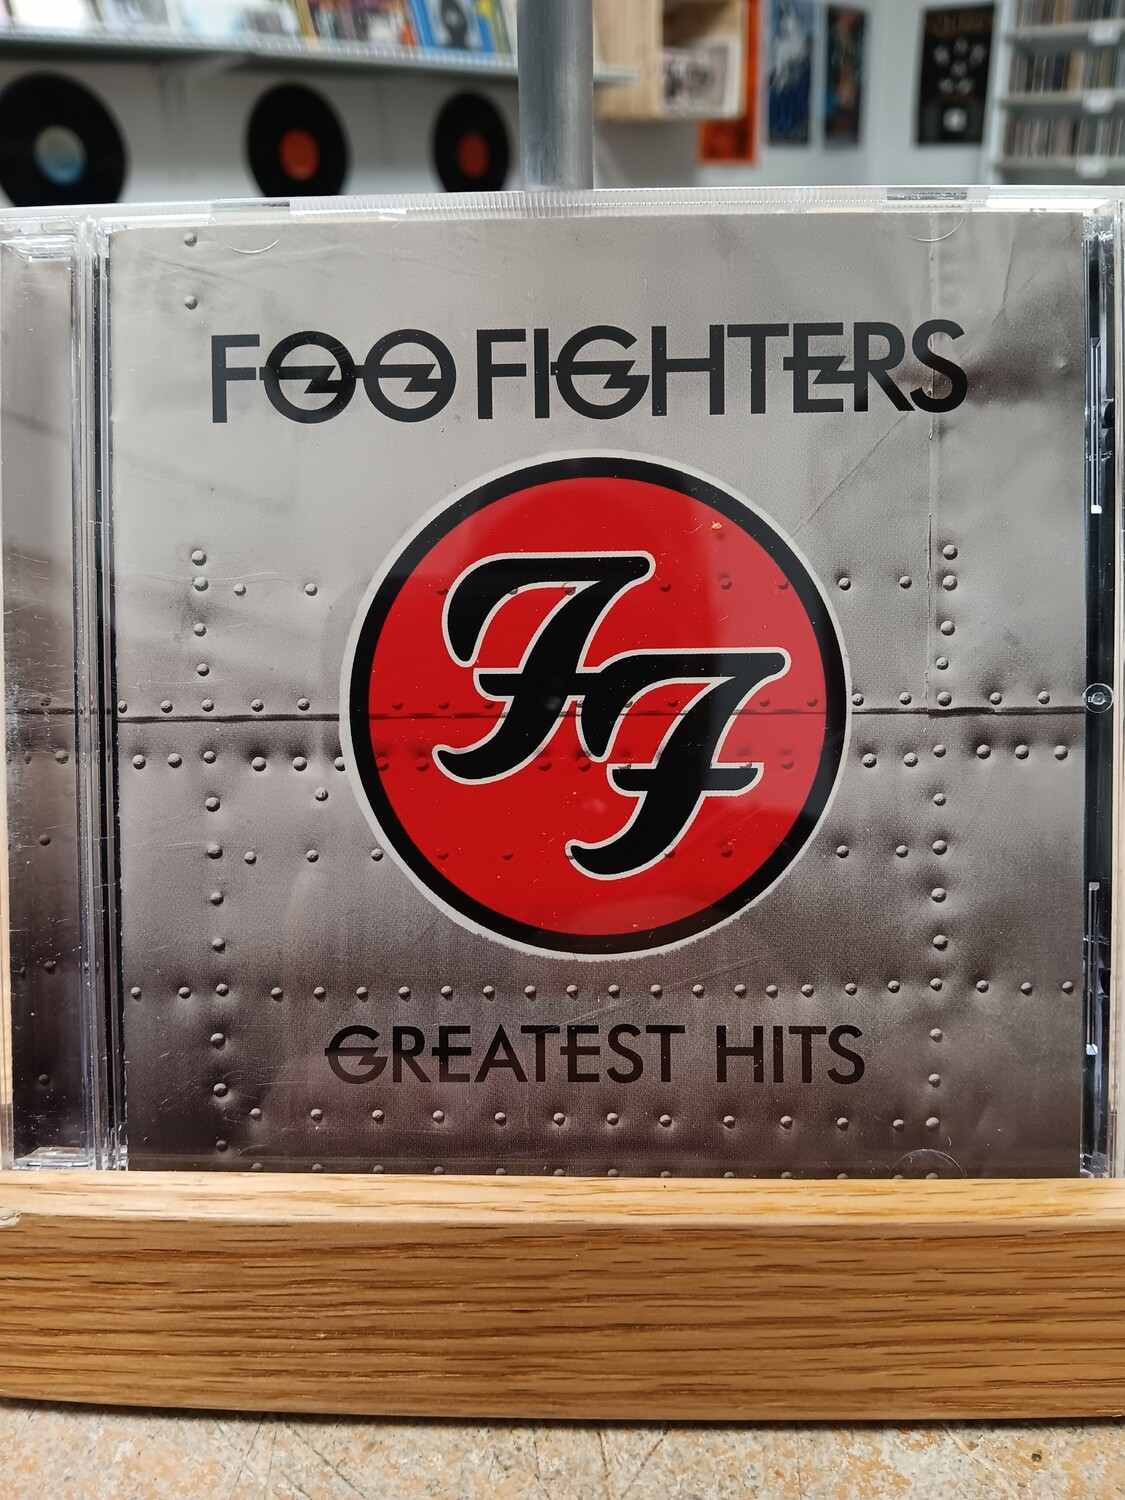 Foo Fighters - Greatest Hits (CD)